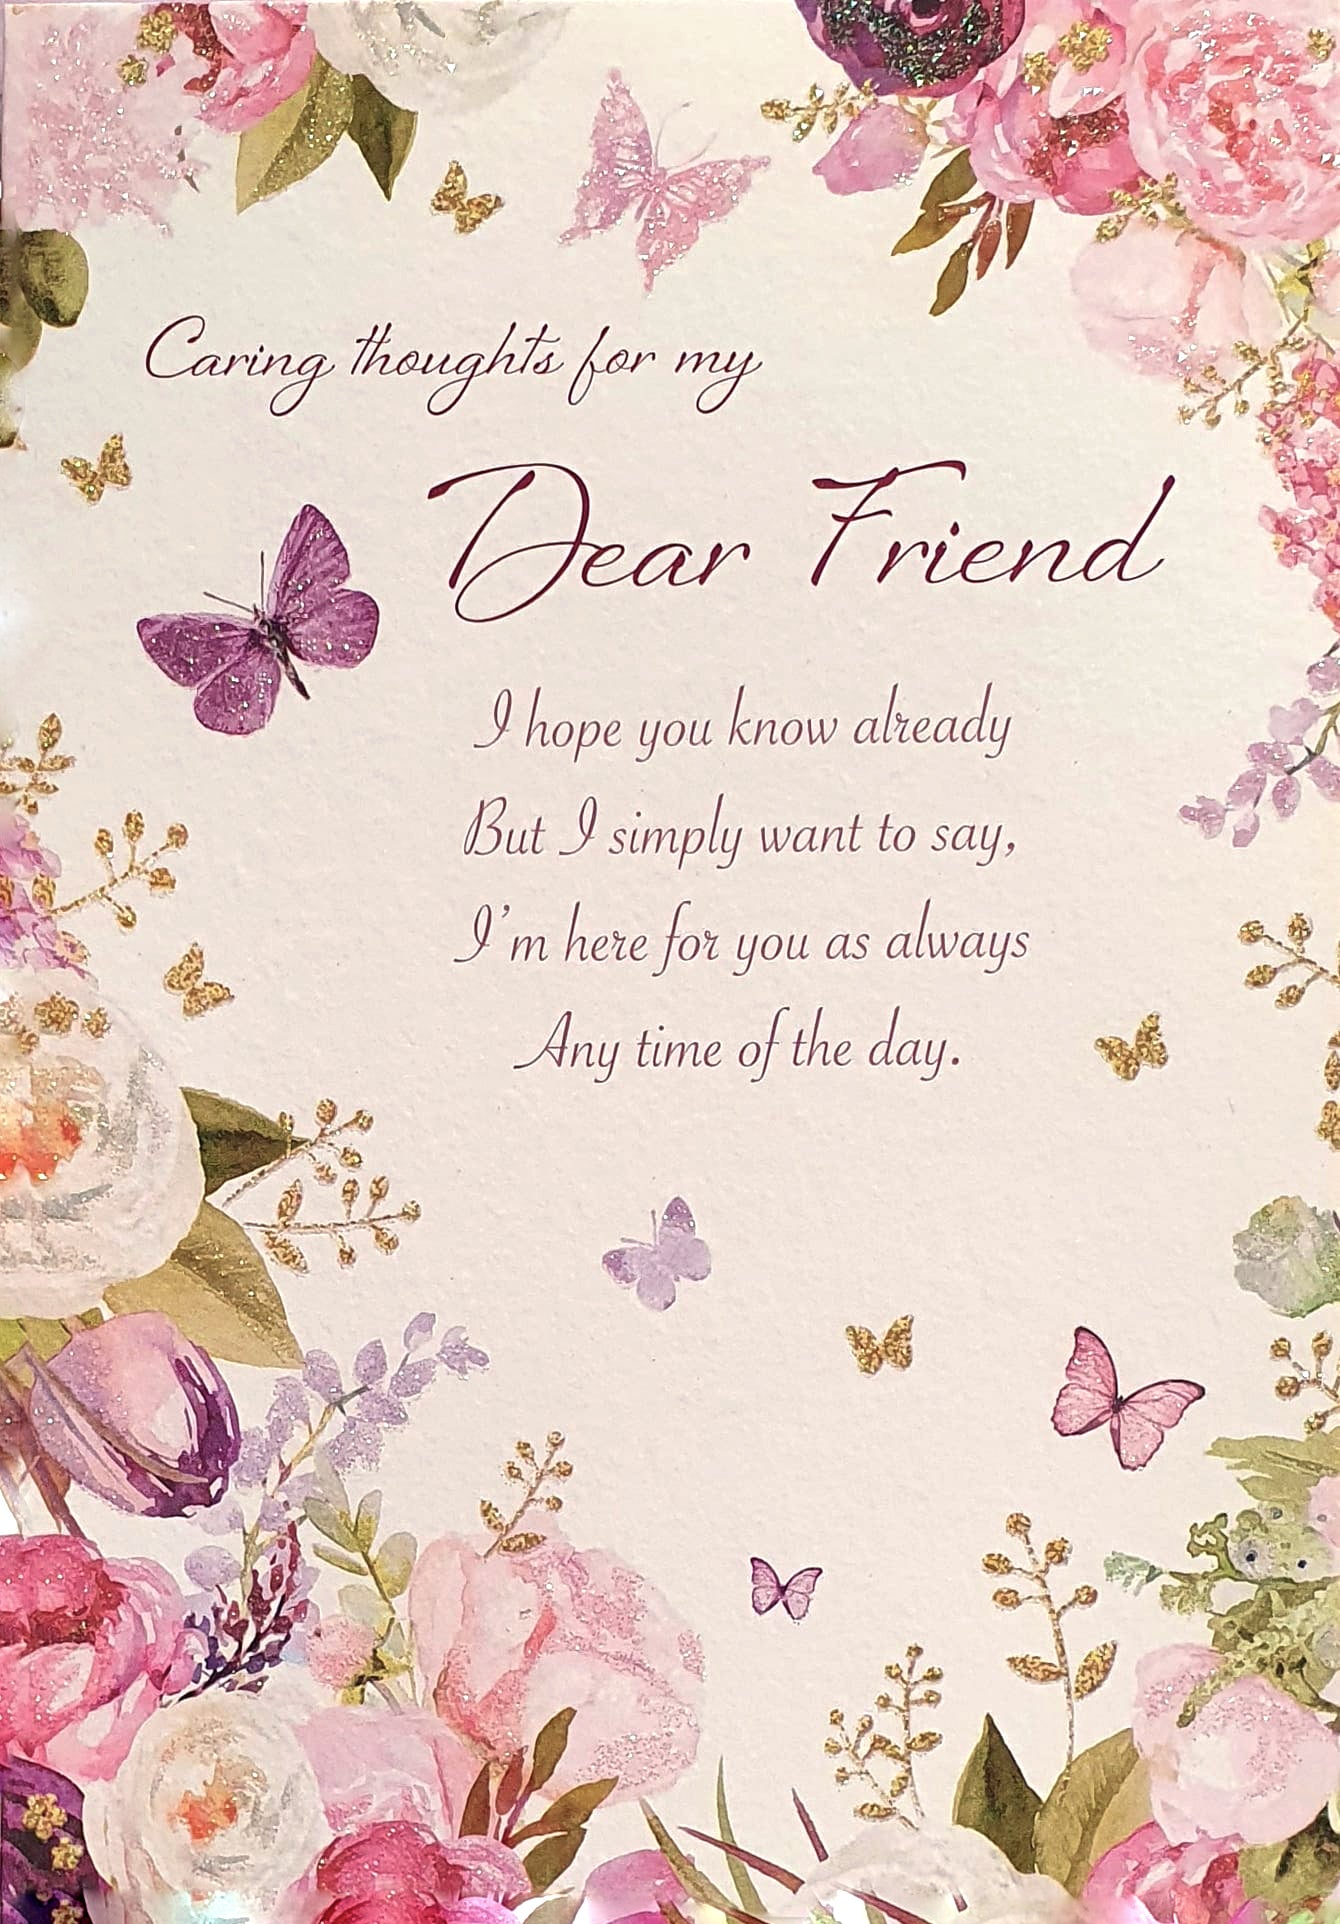 Thinking of You - Caring Thoughts For My Dear Friend